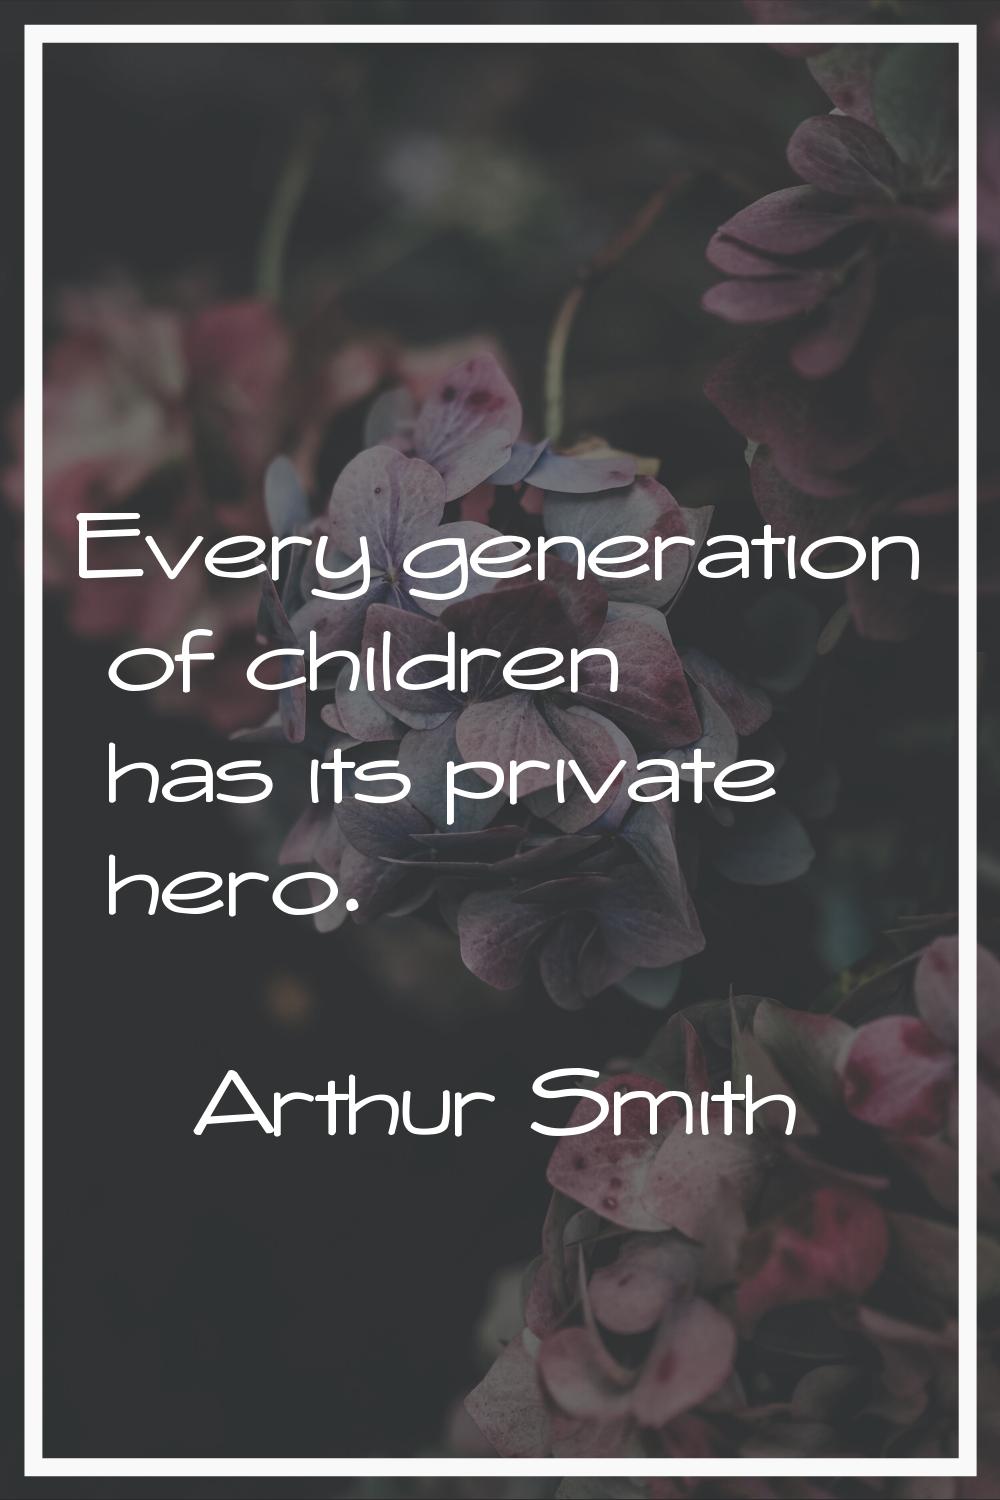 Every generation of children has its private hero.